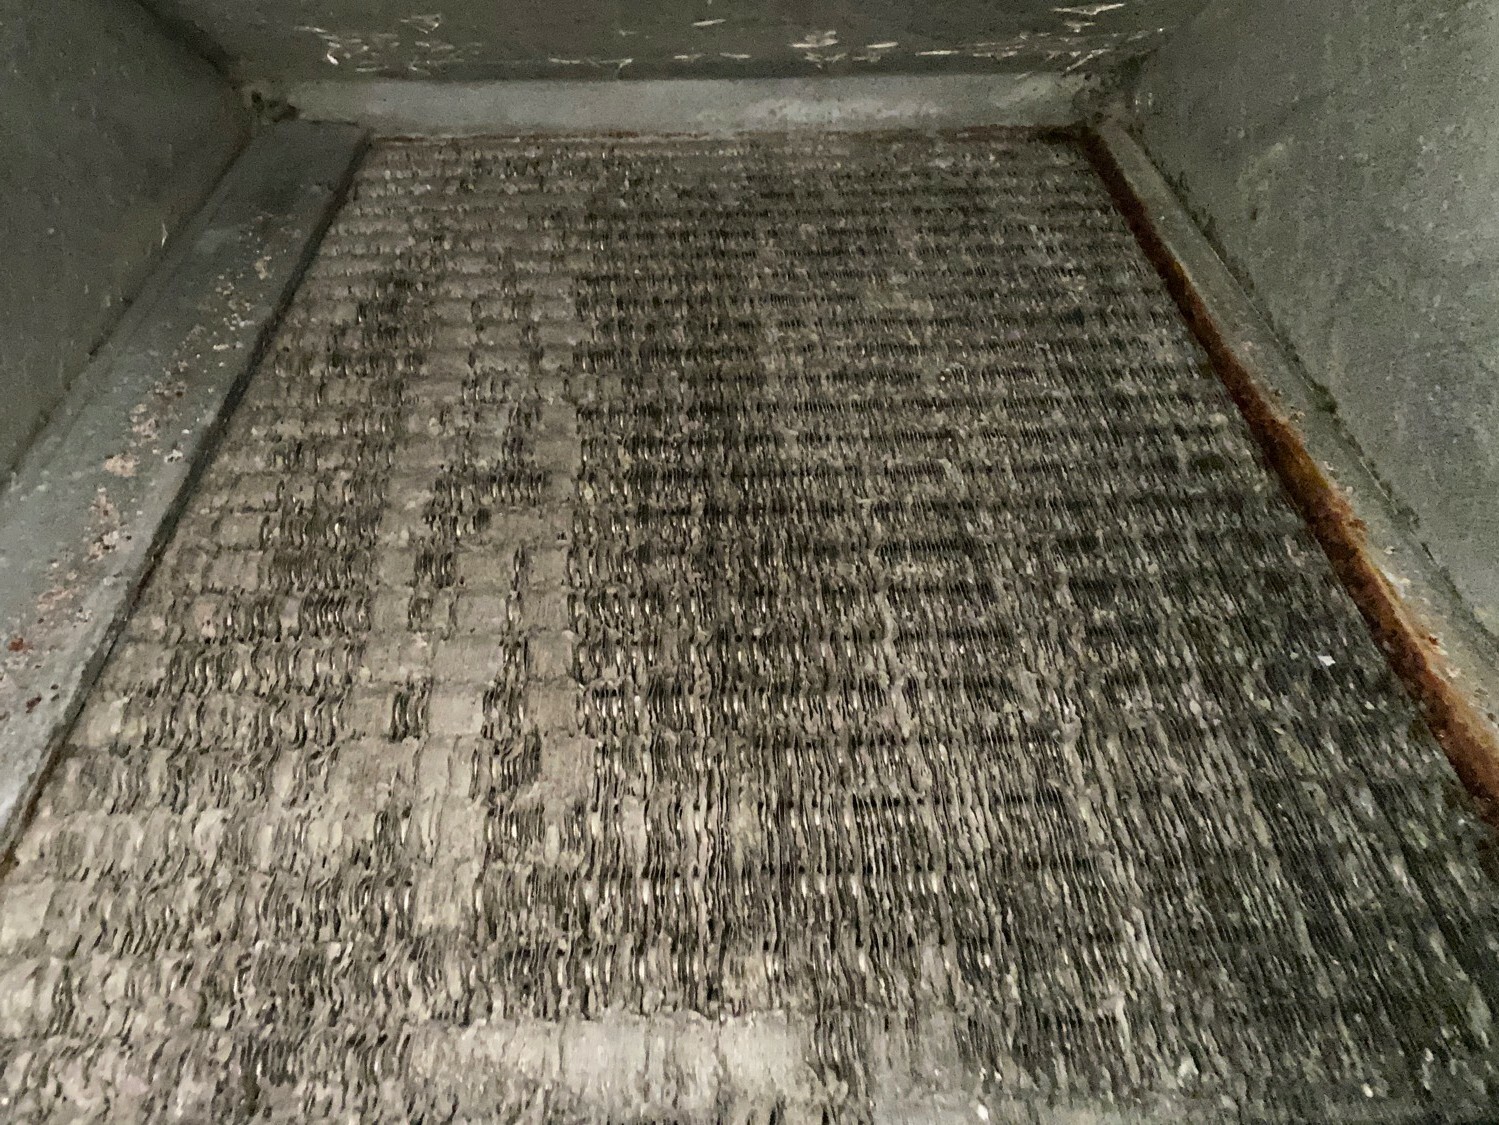 Dirty Evaporator Coils and How to Maintain Them - GGR Home Inspections